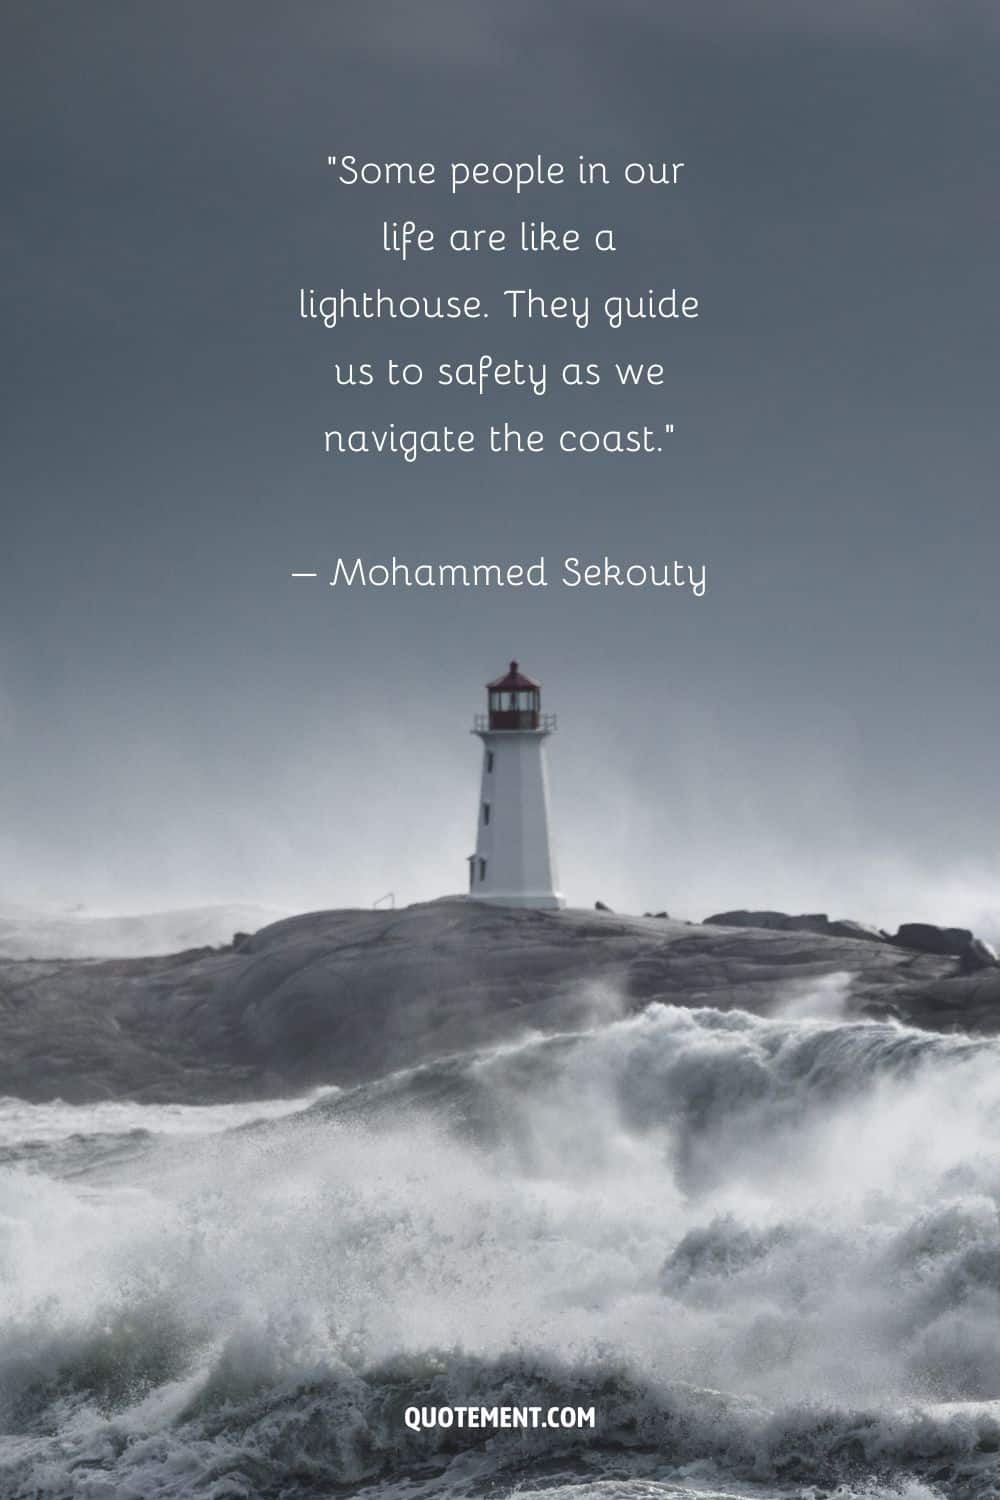 Fascinating quote by Mohammed Sekouty and a lighthouse in the background